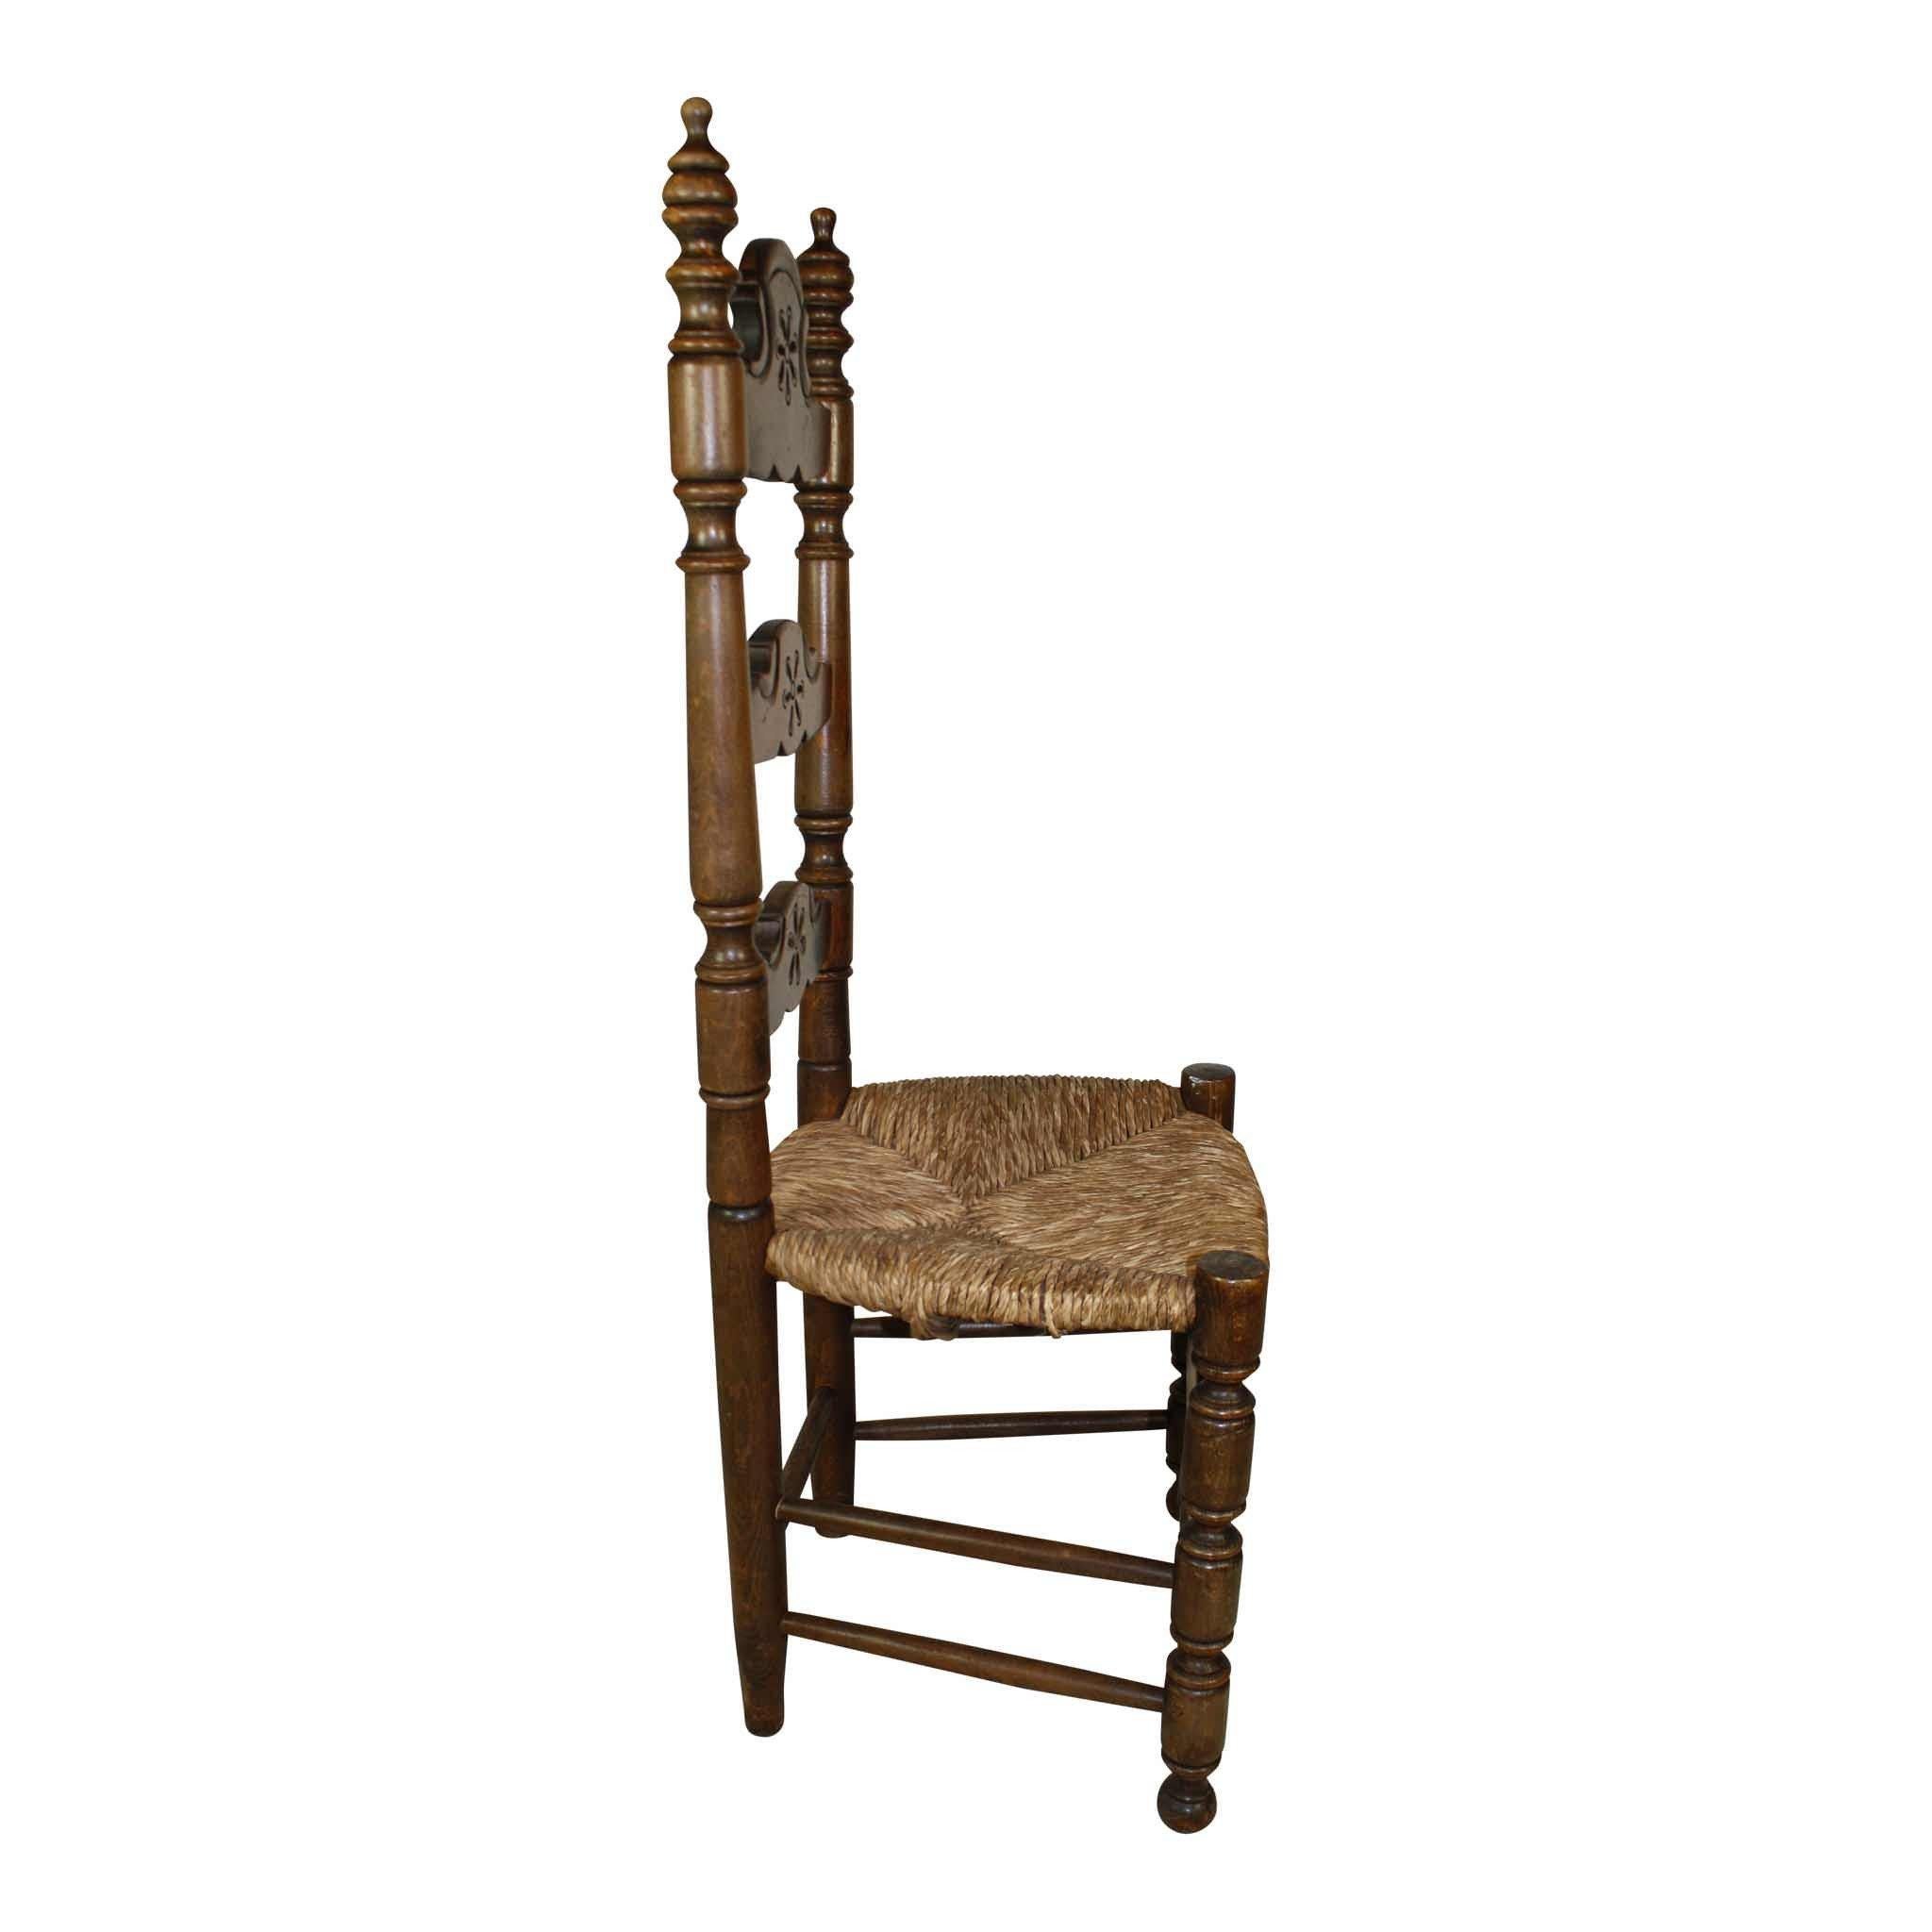 Originating in Spain, this set of four ladder back chairs features walnut frames and rush seats. Turned stiles are capped with finials and support shaped rails with single flowers carved at their centers. The turned front legs terminate in ball feet